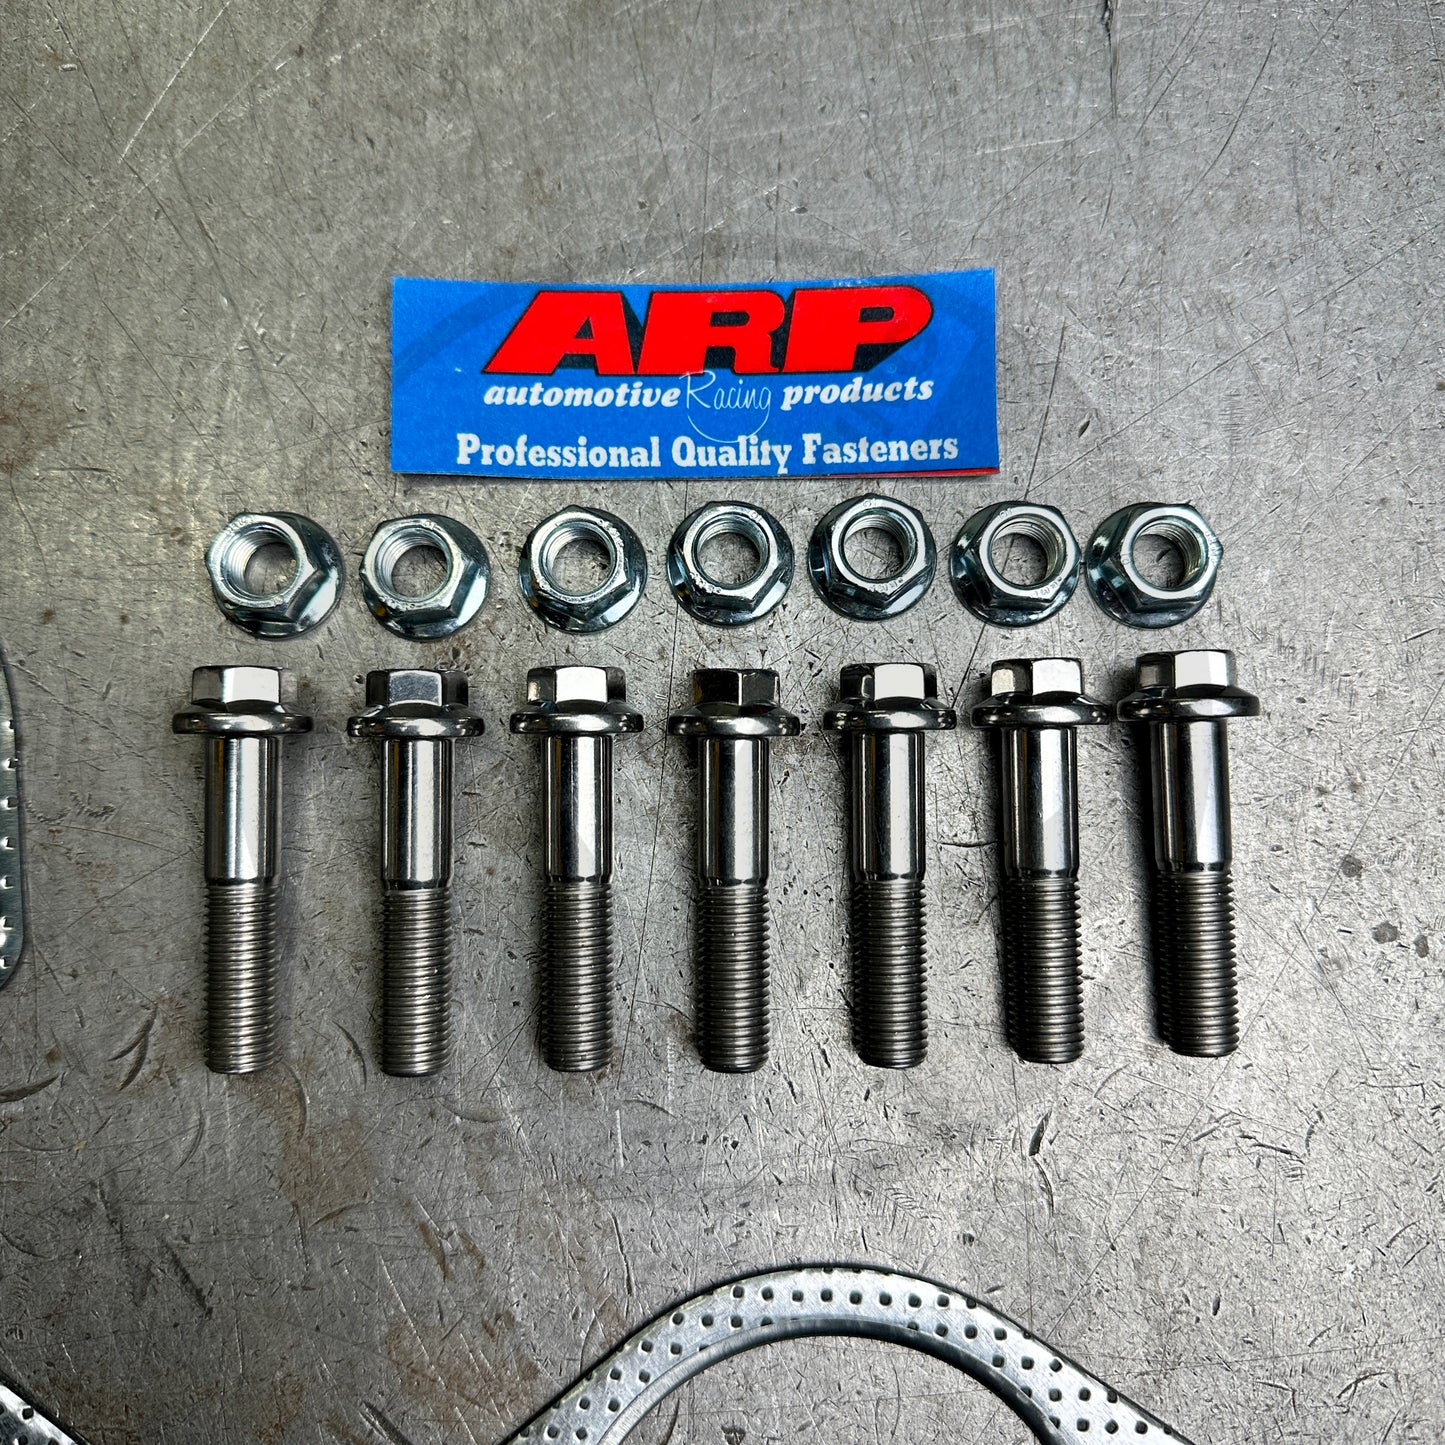 ARP Stainless Exhaust Gasket Hardware Kit 3 inch (76mm) For Honda Civic Acura Integra